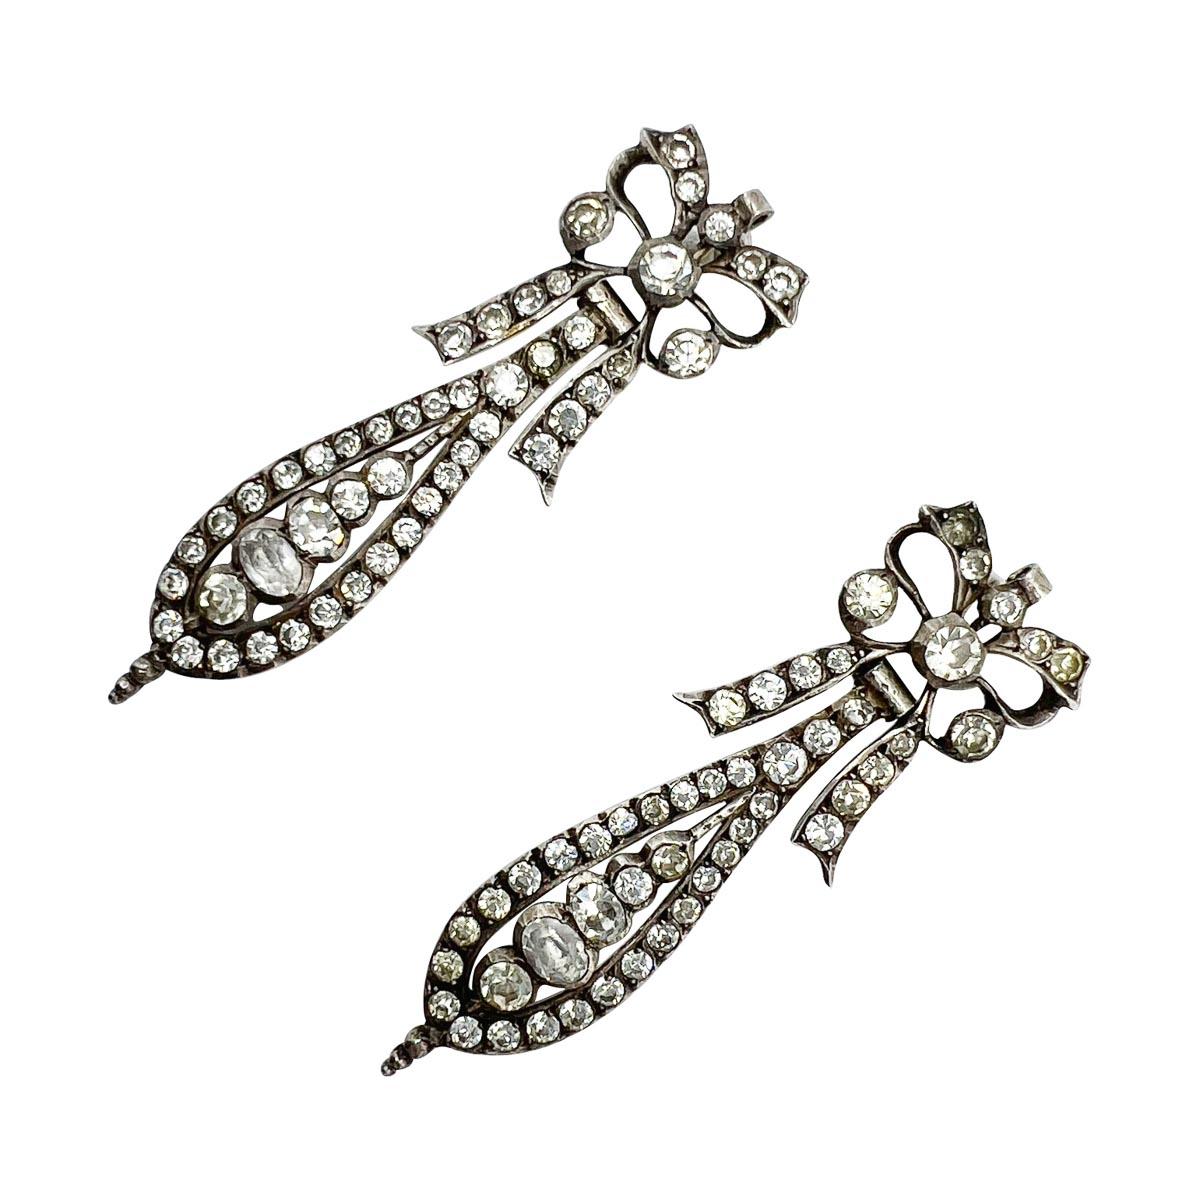 A very special and rare find, a pair of Antique French Paste Earrings crafted in France. Designed in the highly sought-after Pendeloque bow style, the earrings dating to the early Victorian Period yet influenced by the famed Portuguese style